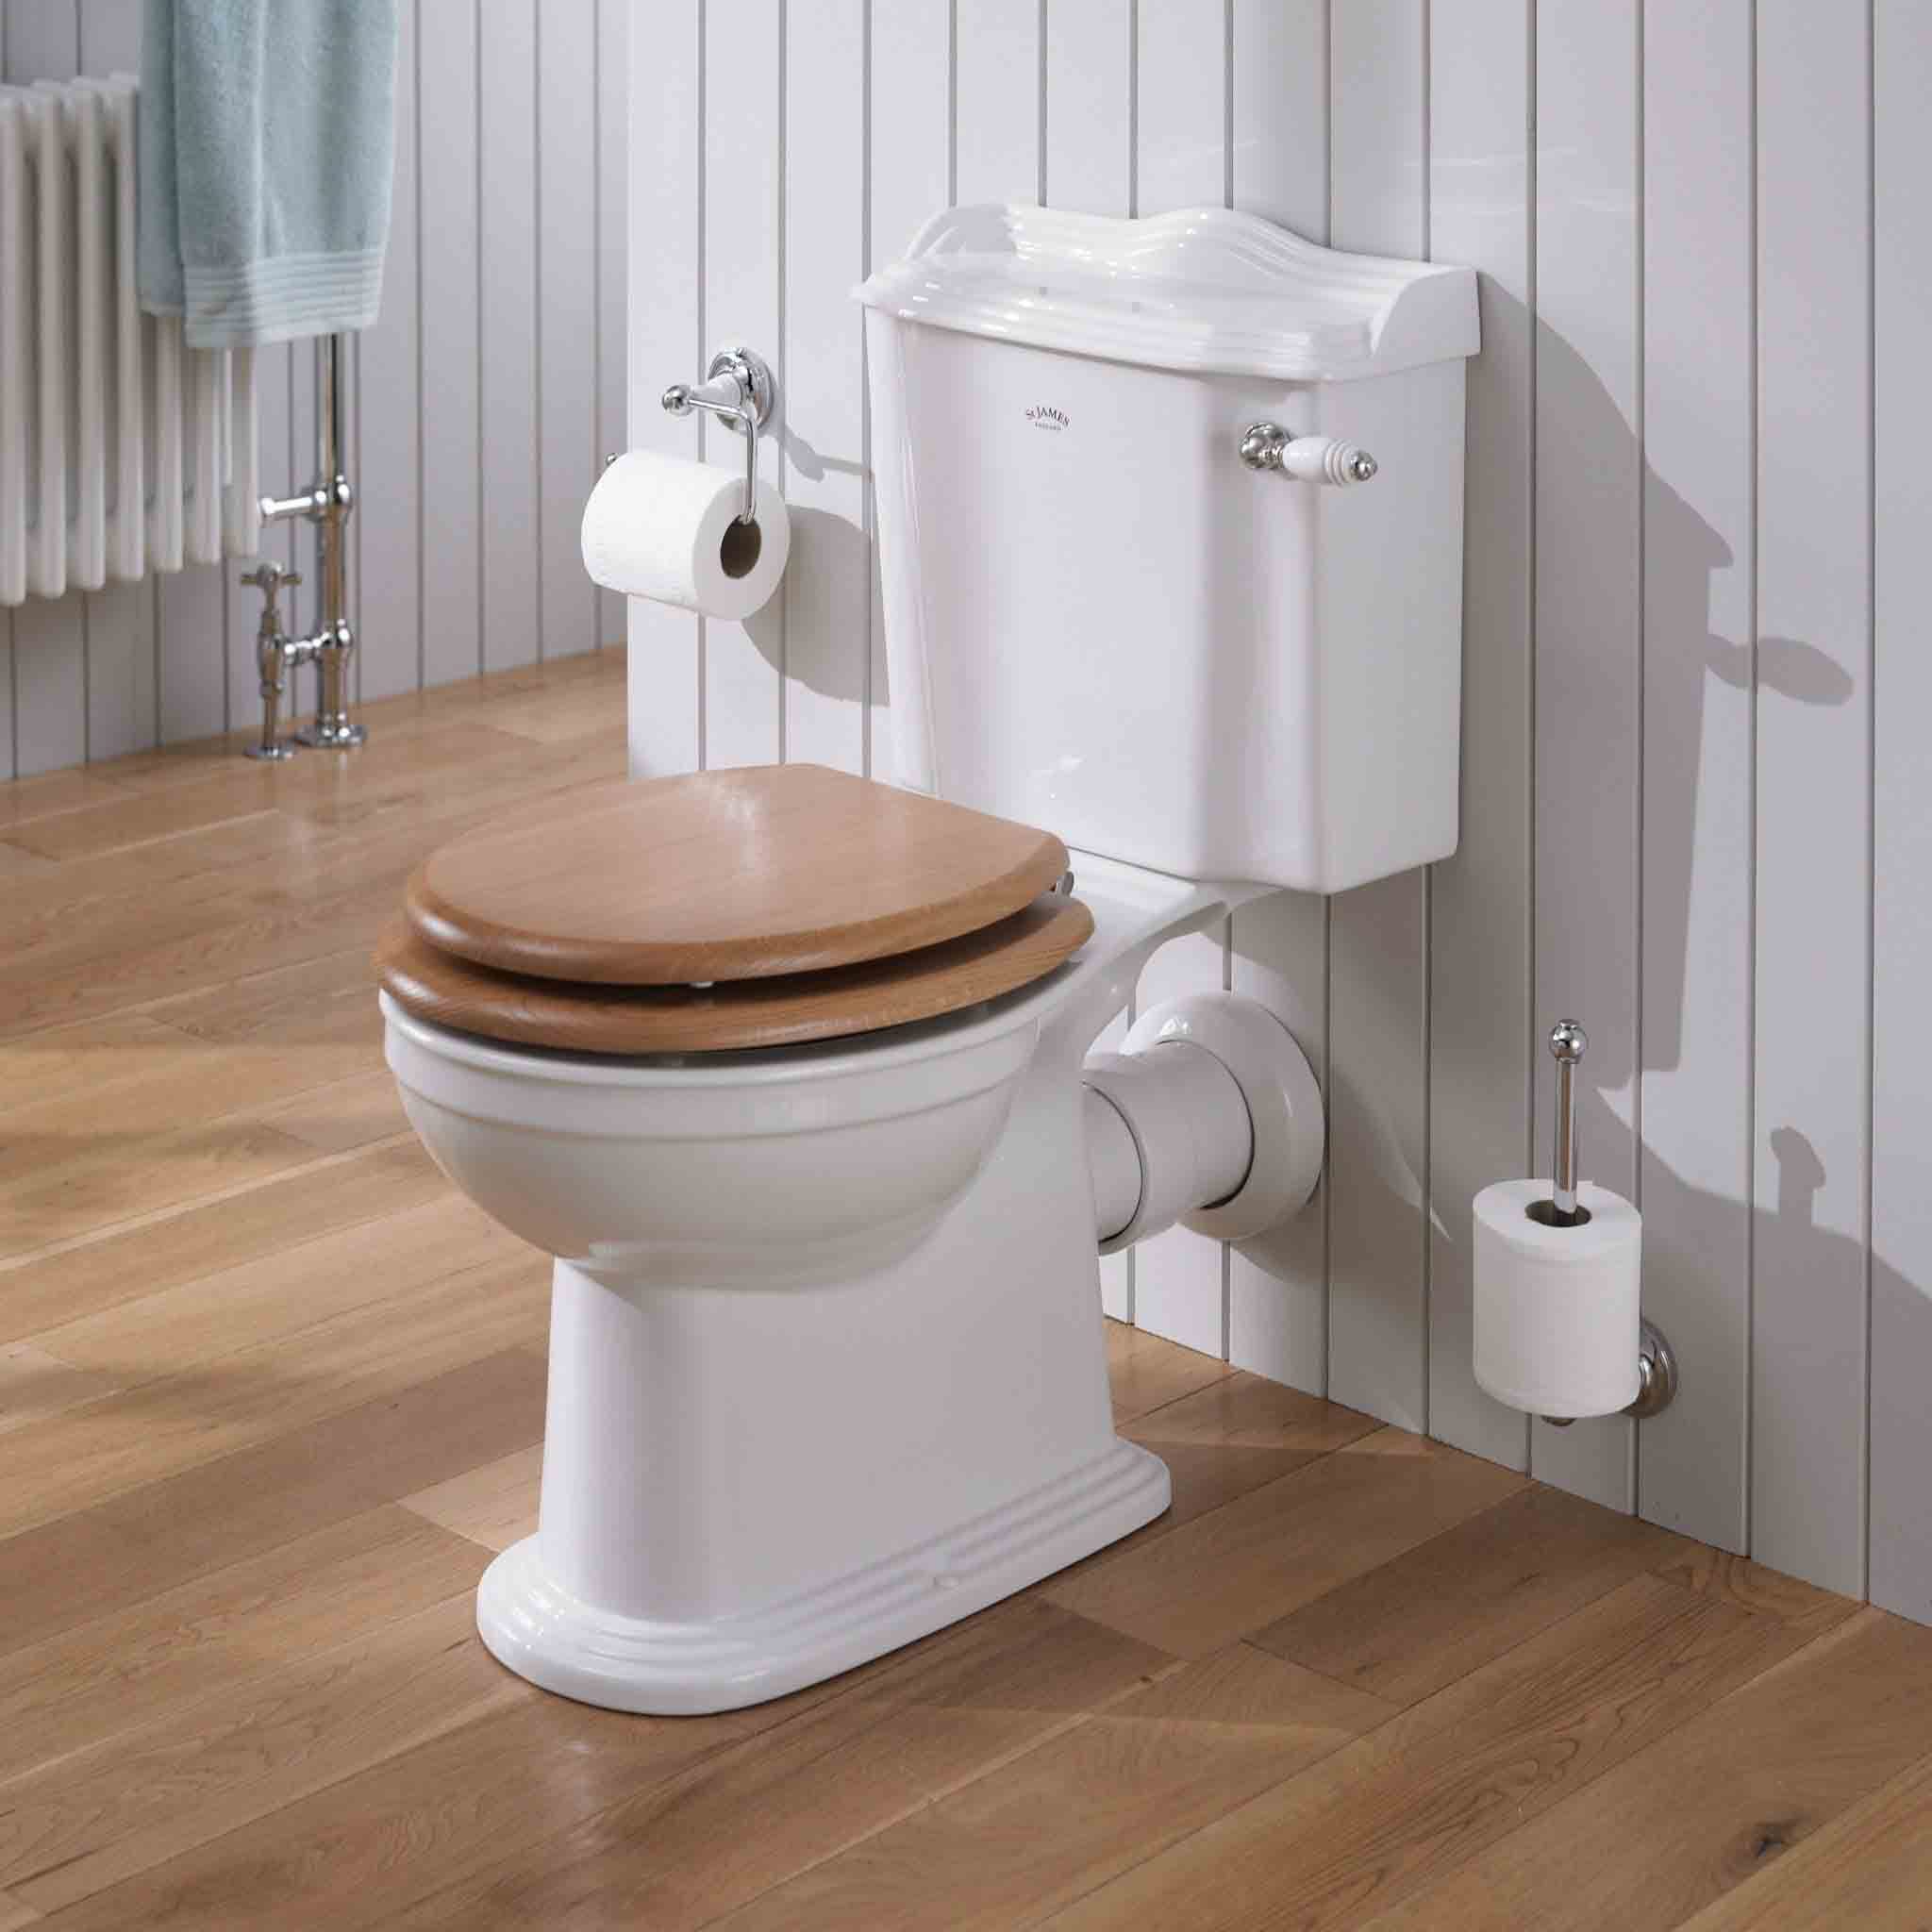 Siphonic Vs Washdown Toilet, Which is better?